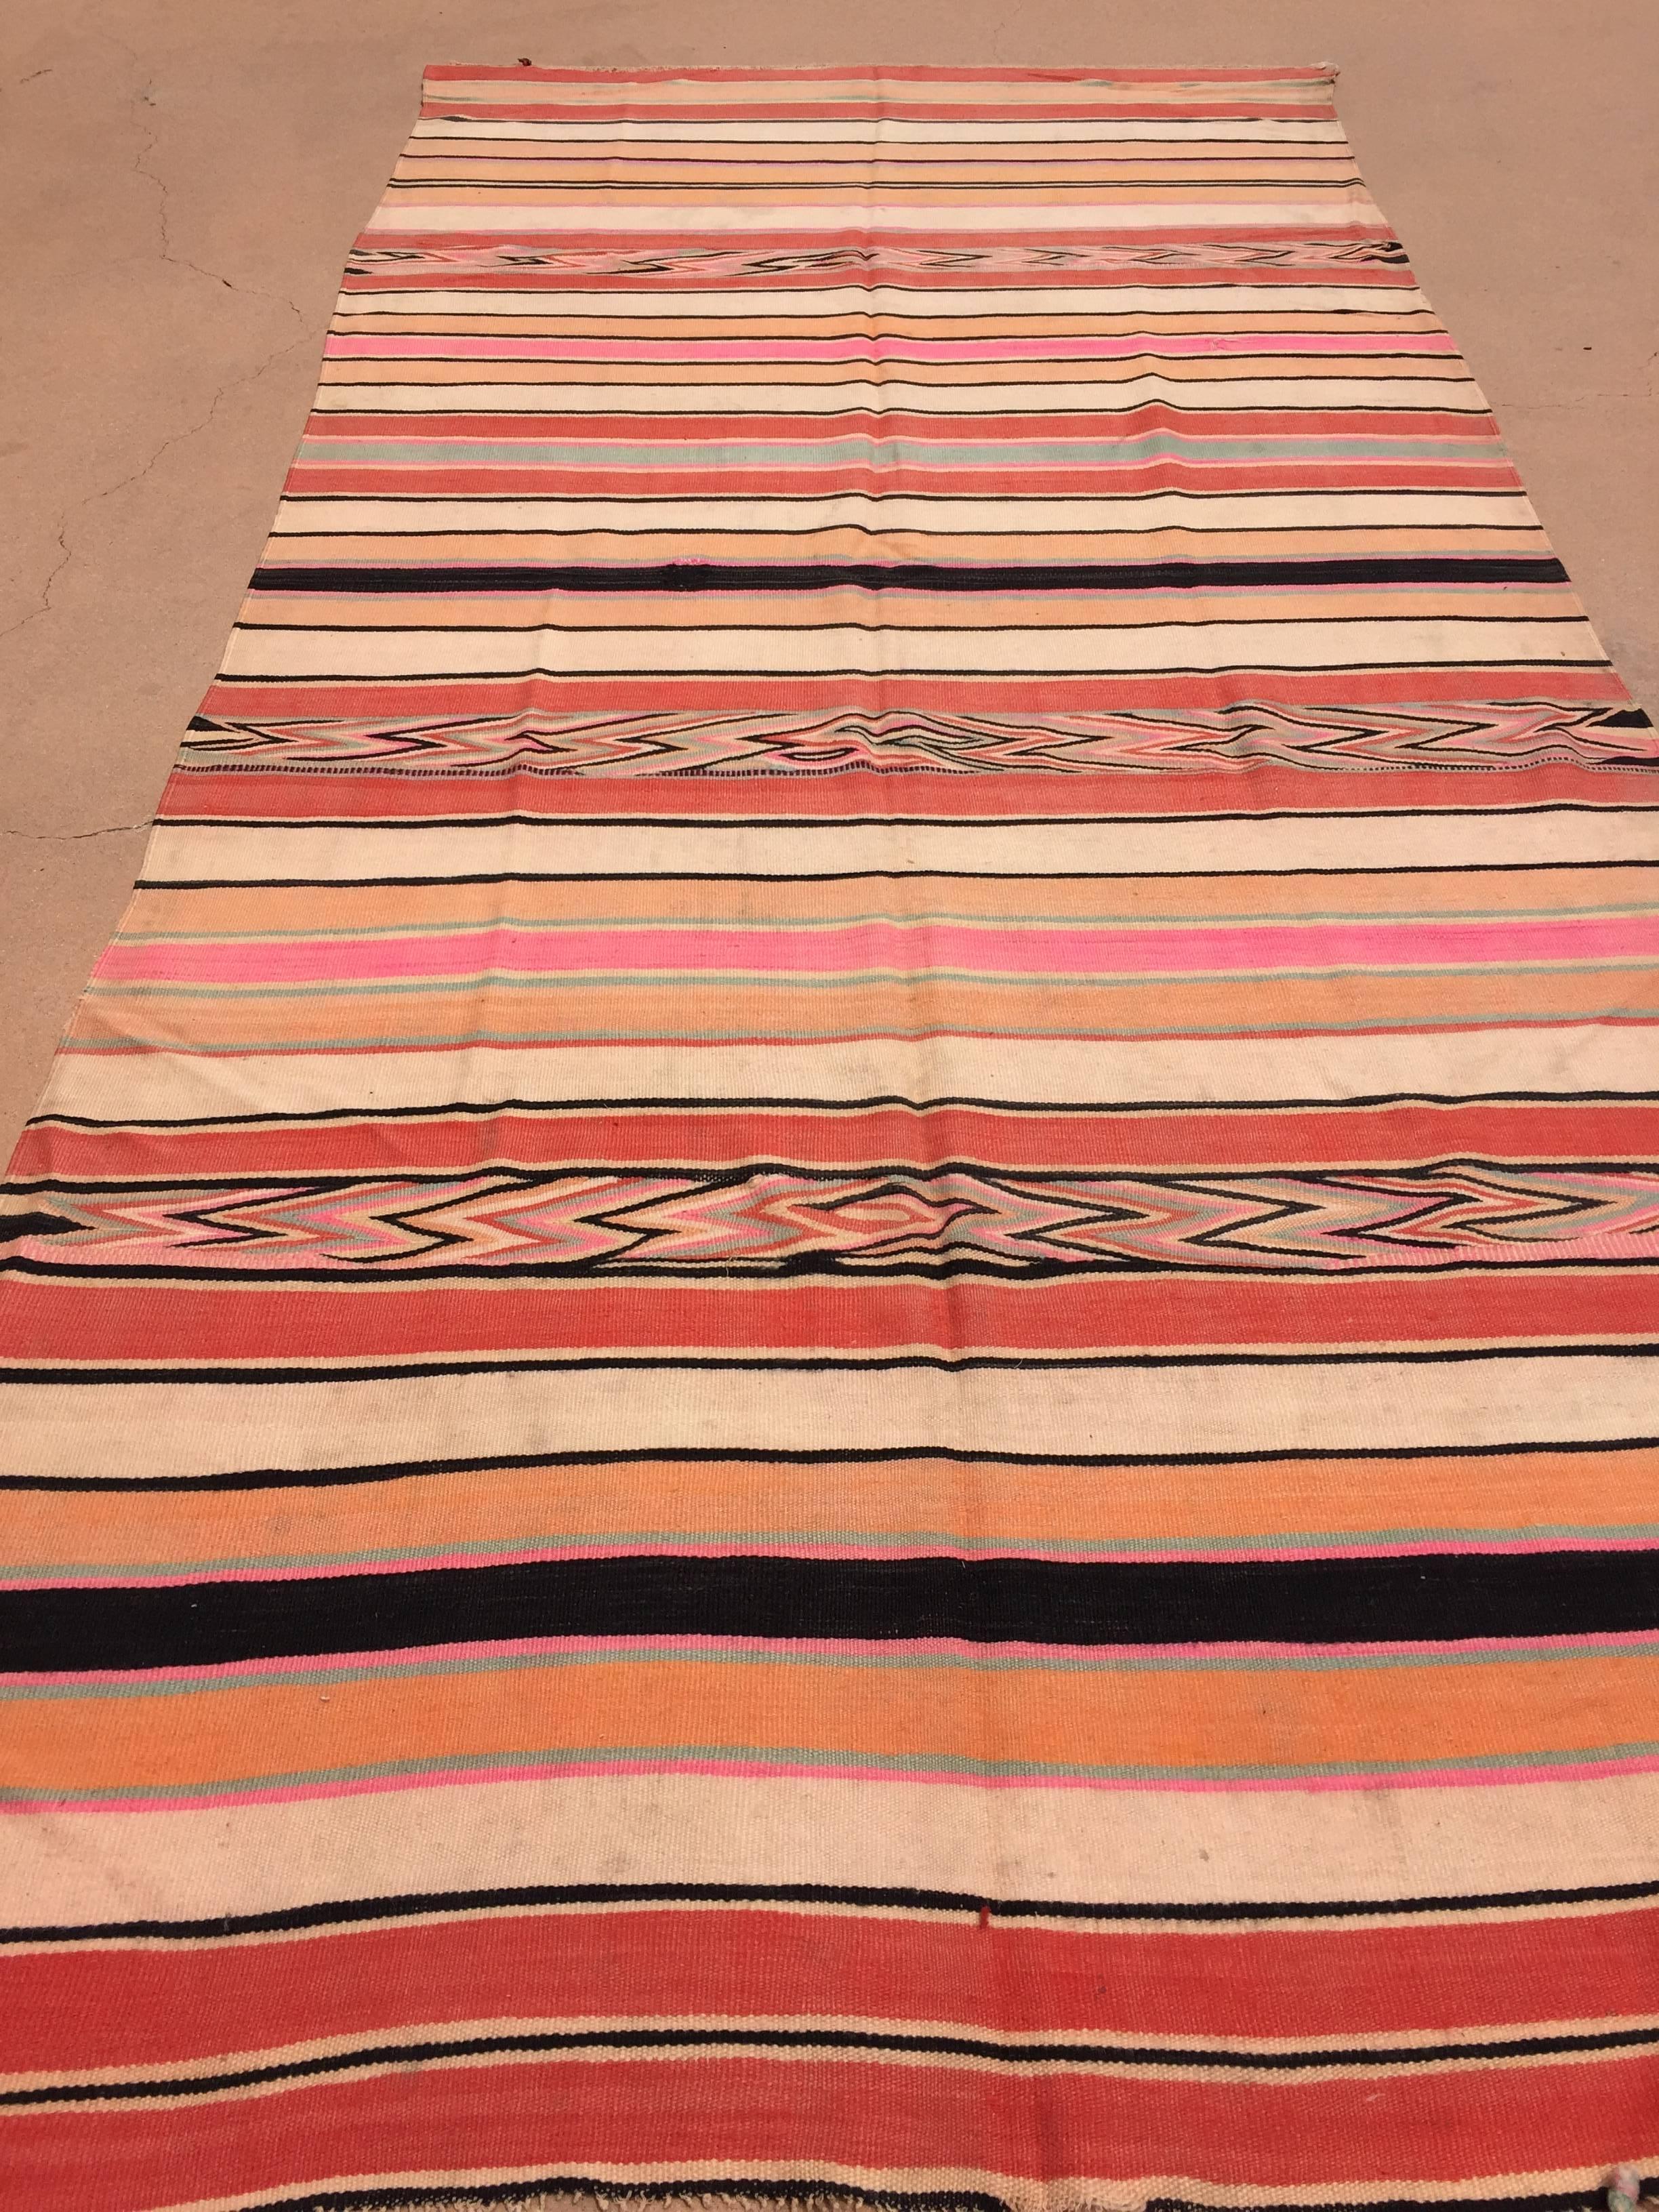 Authentic Vintage Moroccan flat-weave Kilim rug.Large size blanket textile vintage Moroccan rug, handwoven by Berber women in Morocco for their own use. This rug was made using flat-weave technique with linear pattern of alternating stripes in